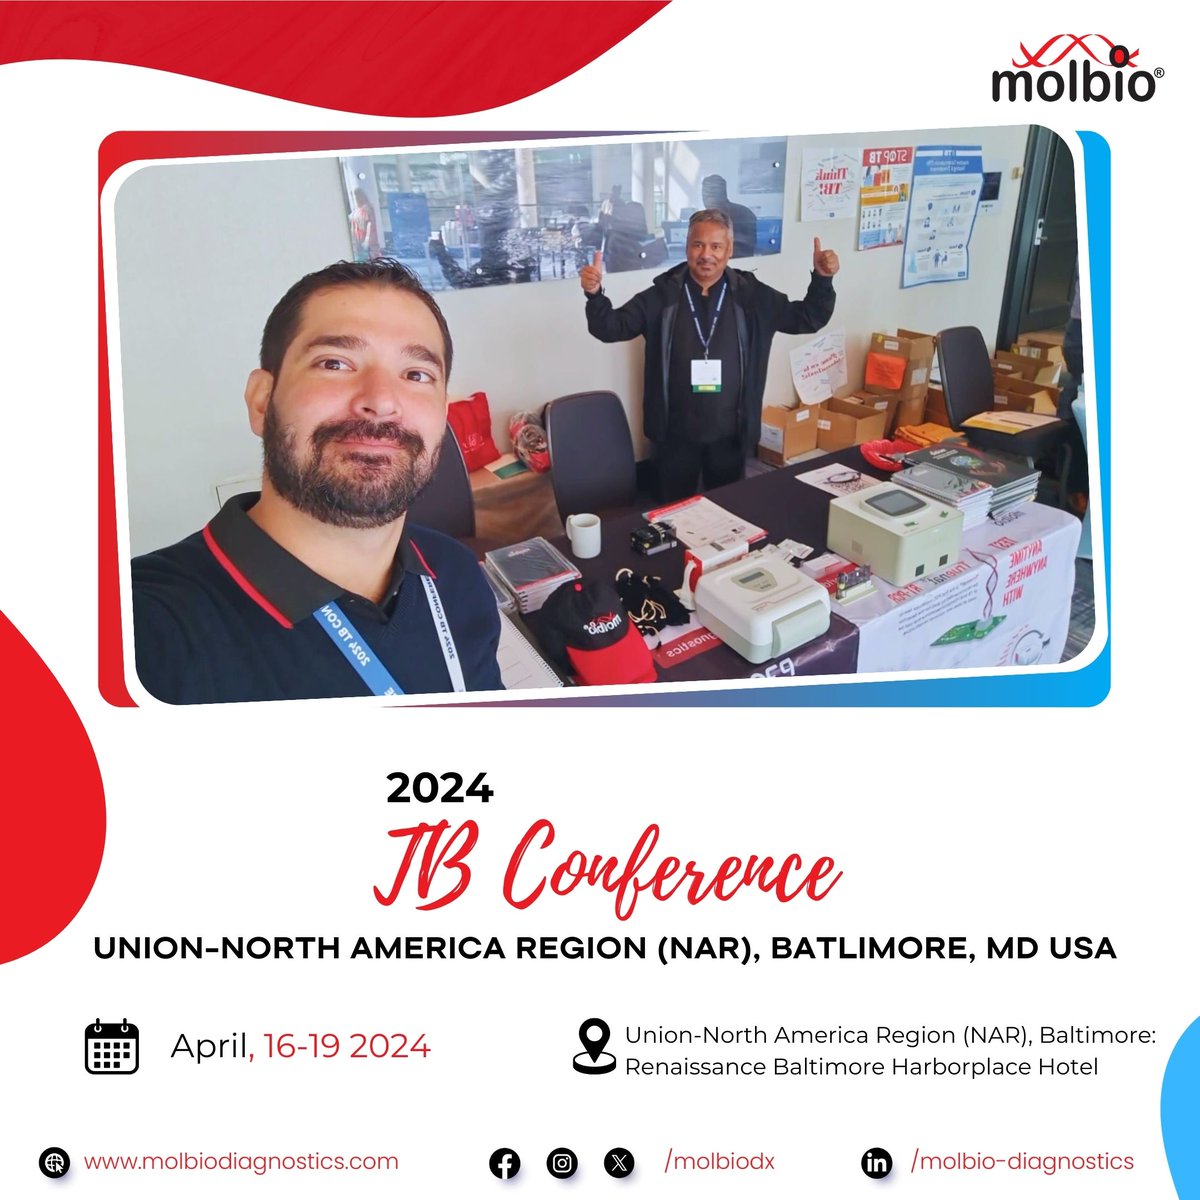 'Exciting Announcement! Molbio Diagnostics joins the Union-North America Region (NAR) TB Conference in Baltimore! Visit us at the Renaissance Baltimore Harborplace Hotel to explore innovations in molecular biology and diagnostics. See you there! #MolbioDiagnostics #Innovation